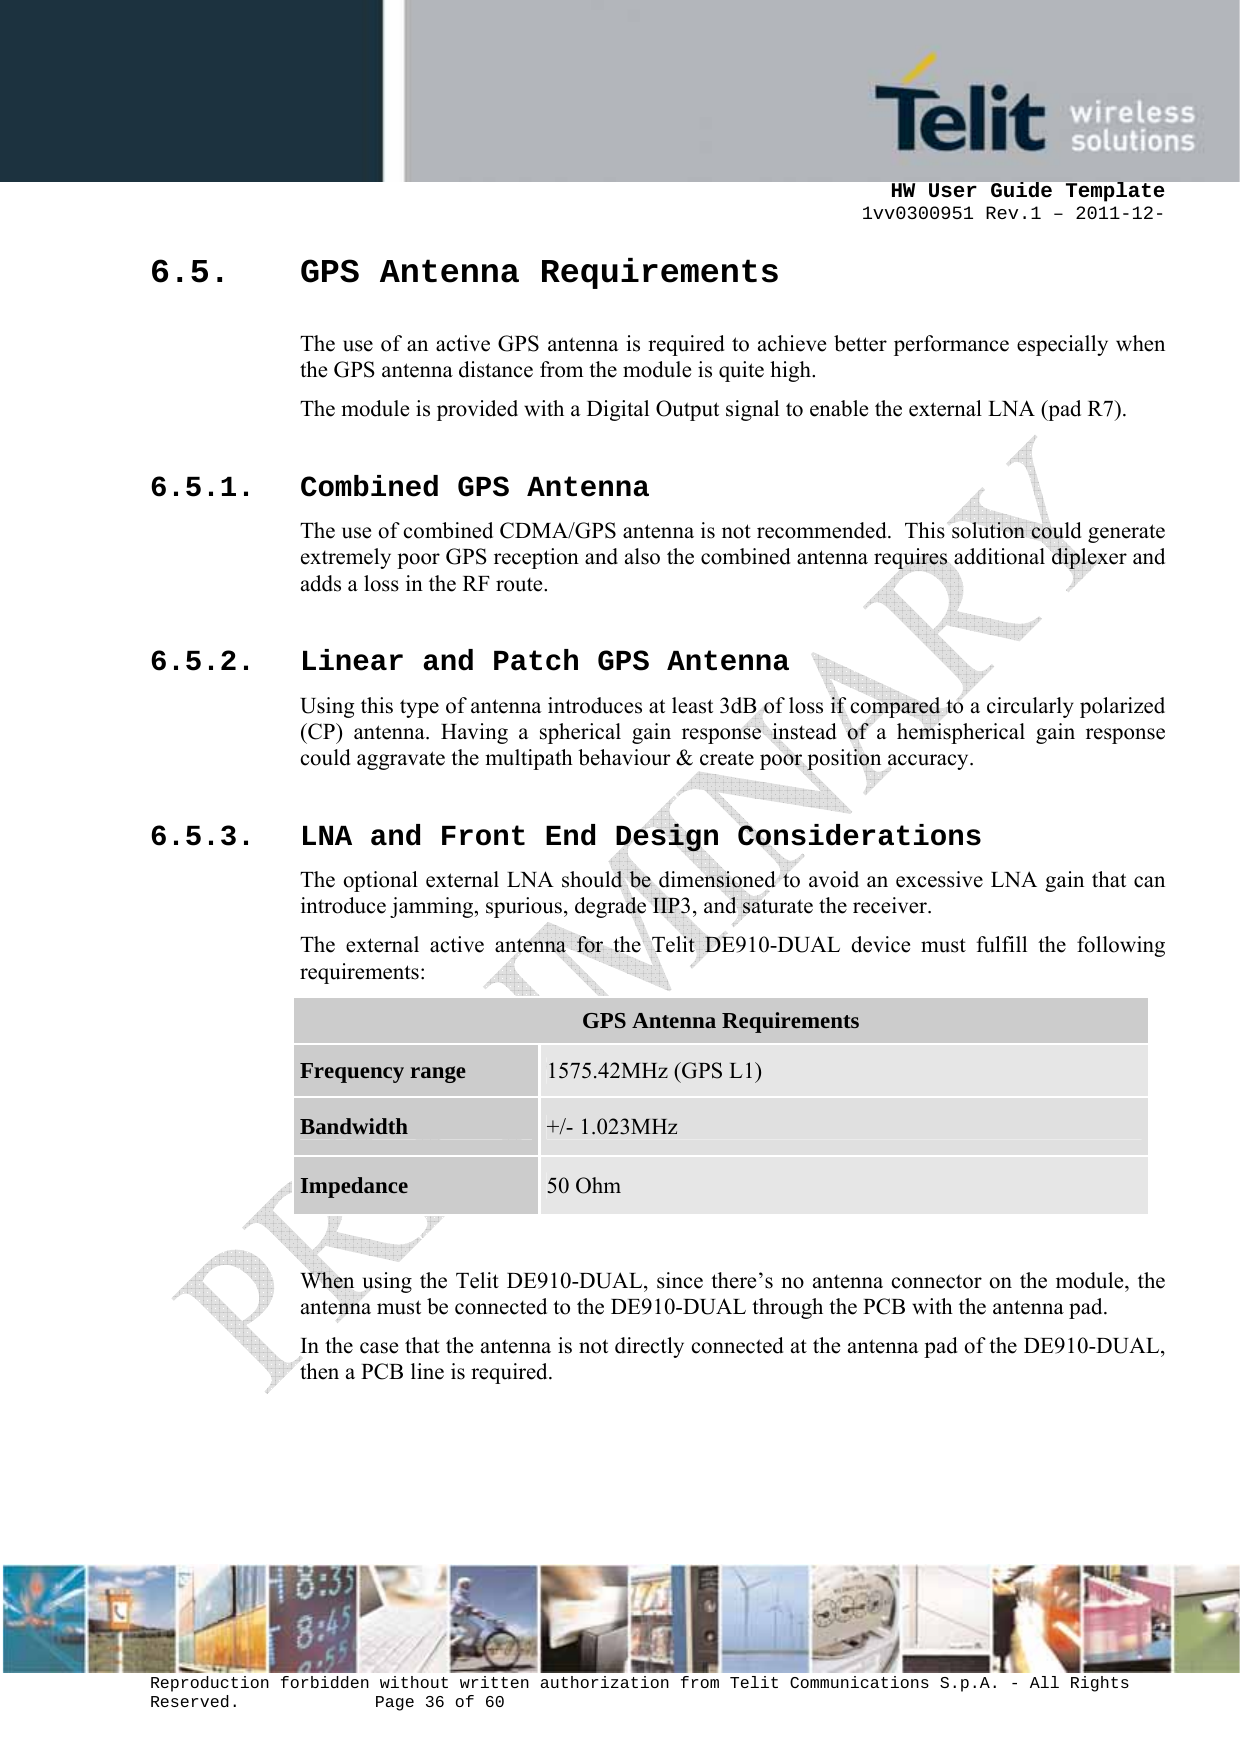      HW User Guide Template 1vv0300951 Rev.1 – 2011-12-  Reproduction forbidden without written authorization from Telit Communications S.p.A. - All Rights Reserved.    Page 36 of 60                                                     6.5. GPS Antenna Requirements The use of an active GPS antenna is required to achieve better performance especially when the GPS antenna distance from the module is quite high. The module is provided with a Digital Output signal to enable the external LNA (pad R7). 6.5.1. Combined GPS Antenna The use of combined CDMA/GPS antenna is not recommended.  This solution could generate extremely poor GPS reception and also the combined antenna requires additional diplexer and adds a loss in the RF route. 6.5.2. Linear and Patch GPS Antenna Using this type of antenna introduces at least 3dB of loss if compared to a circularly polarized (CP) antenna. Having a spherical gain response instead of a hemispherical gain response could aggravate the multipath behaviour &amp; create poor position accuracy. 6.5.3. LNA and Front End Design Considerations The optional external LNA should be dimensioned to avoid an excessive LNA gain that can introduce jamming, spurious, degrade IIP3, and saturate the receiver. The external active antenna for the Telit DE910-DUAL device must fulfill the following requirements: GPS Antenna Requirements Frequency range  1575.42MHz (GPS L1) Bandwidth  +/- 1.023MHz Impedance  50 Ohm  When using the Telit DE910-DUAL, since there’s no antenna connector on the module, the antenna must be connected to the DE910-DUAL through the PCB with the antenna pad.  In the case that the antenna is not directly connected at the antenna pad of the DE910-DUAL, then a PCB line is required.     